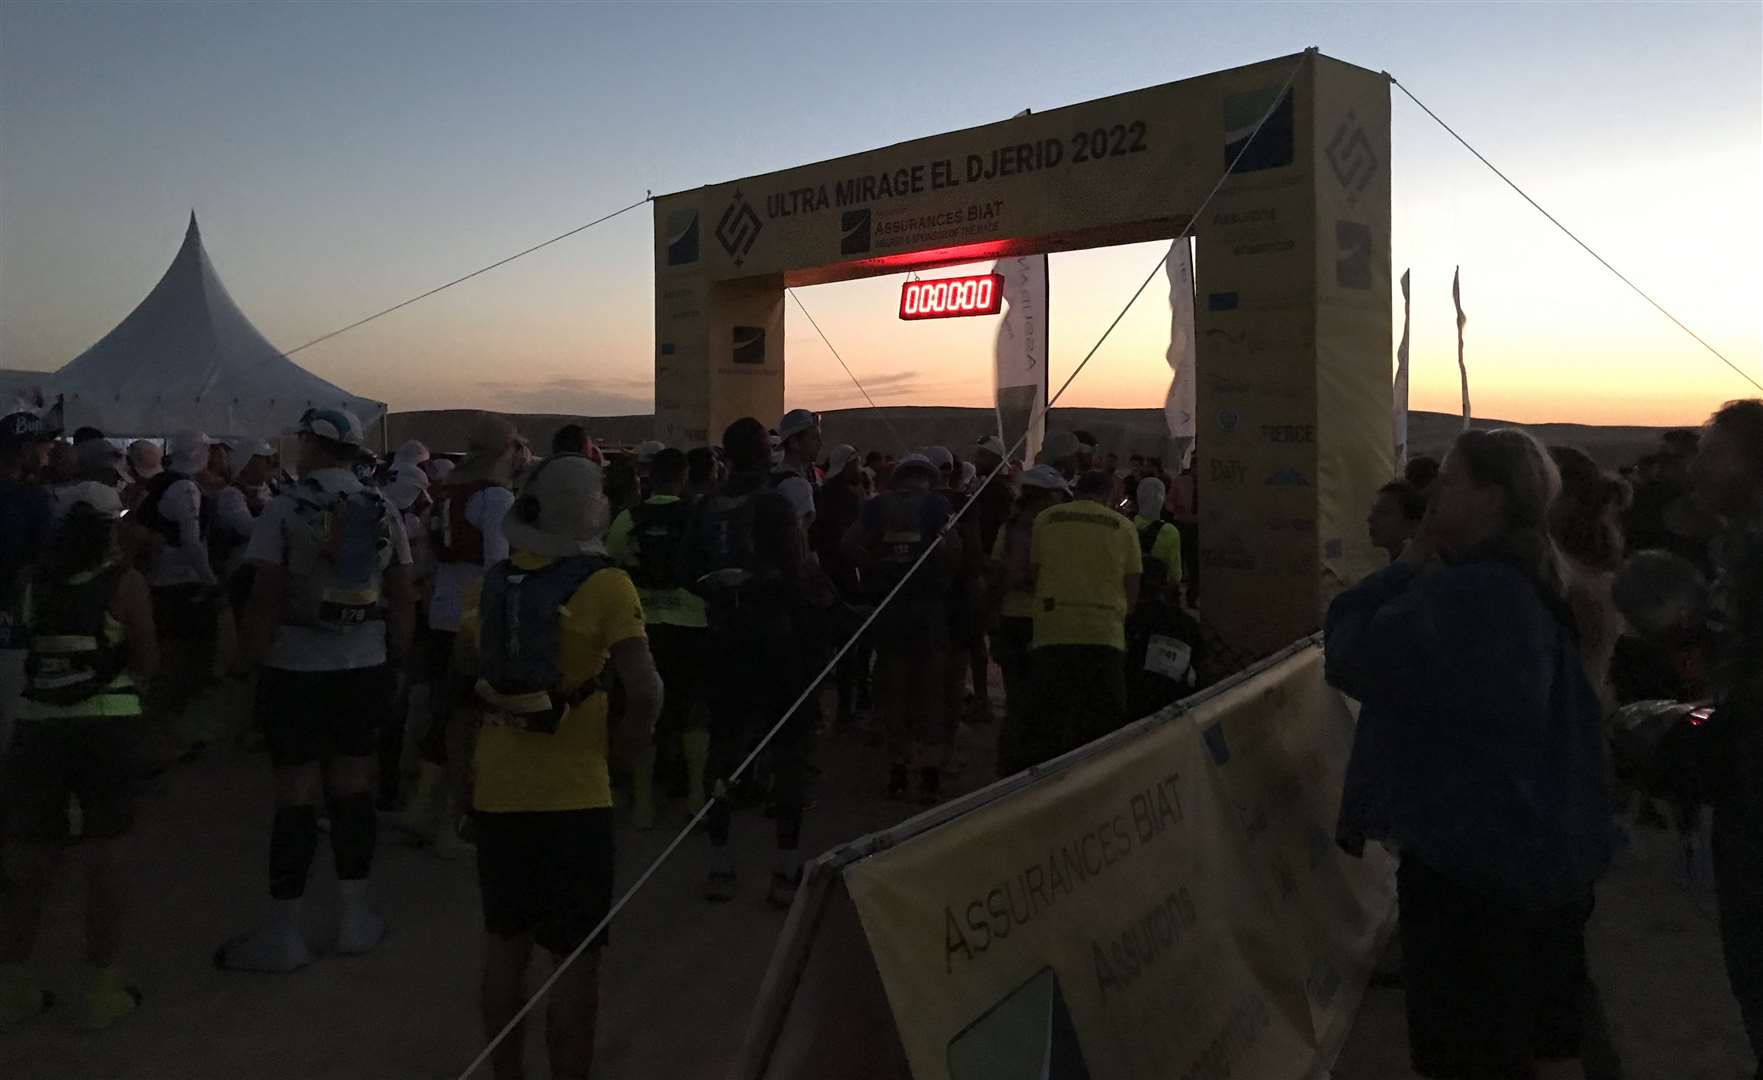 Runners gather for the start of the Ultra Mirage event